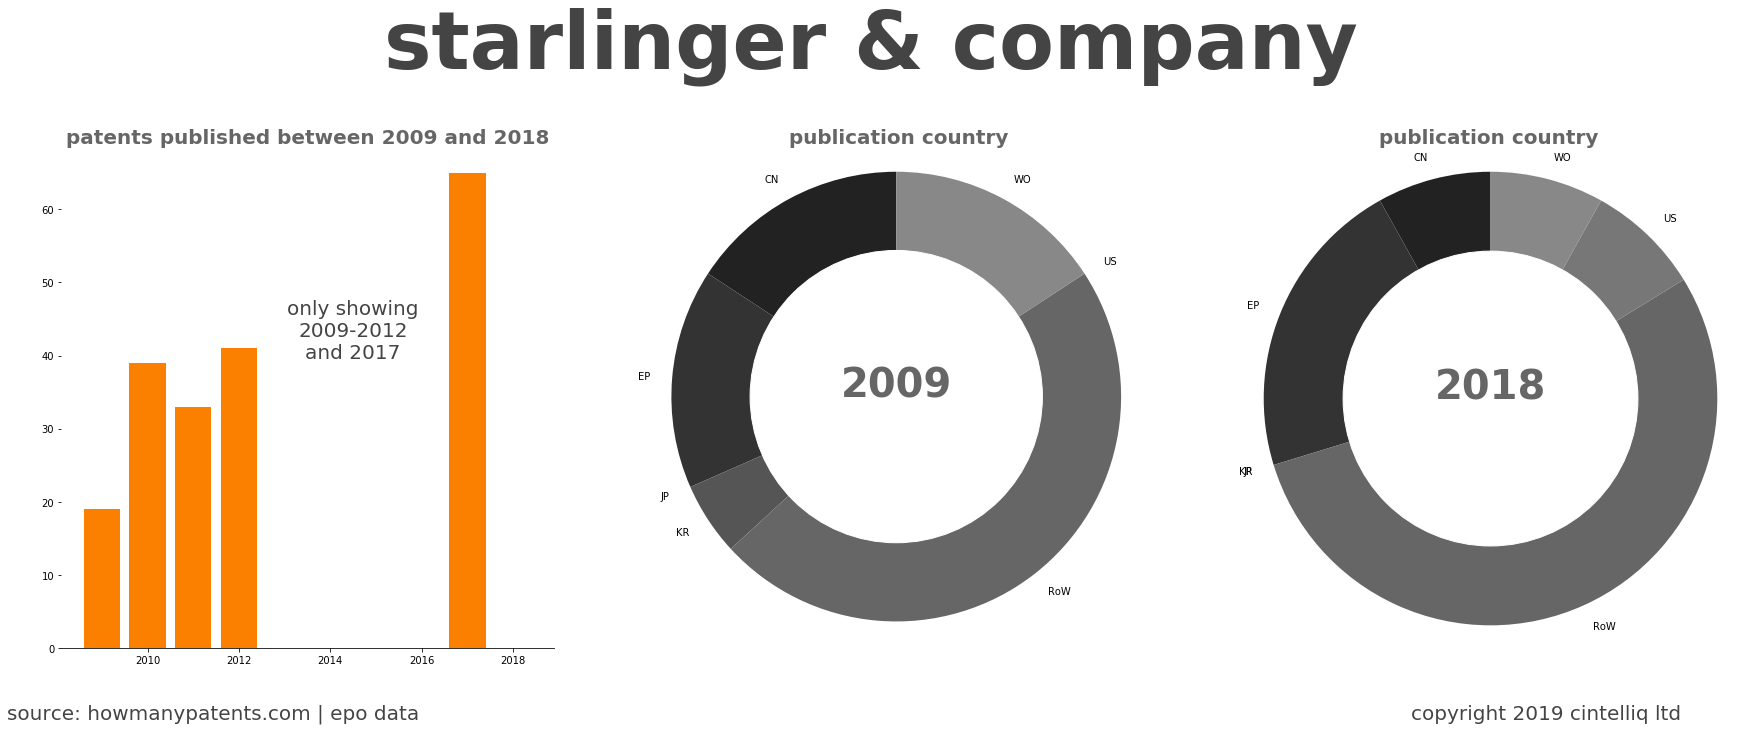 summary of patents for Starlinger & Company